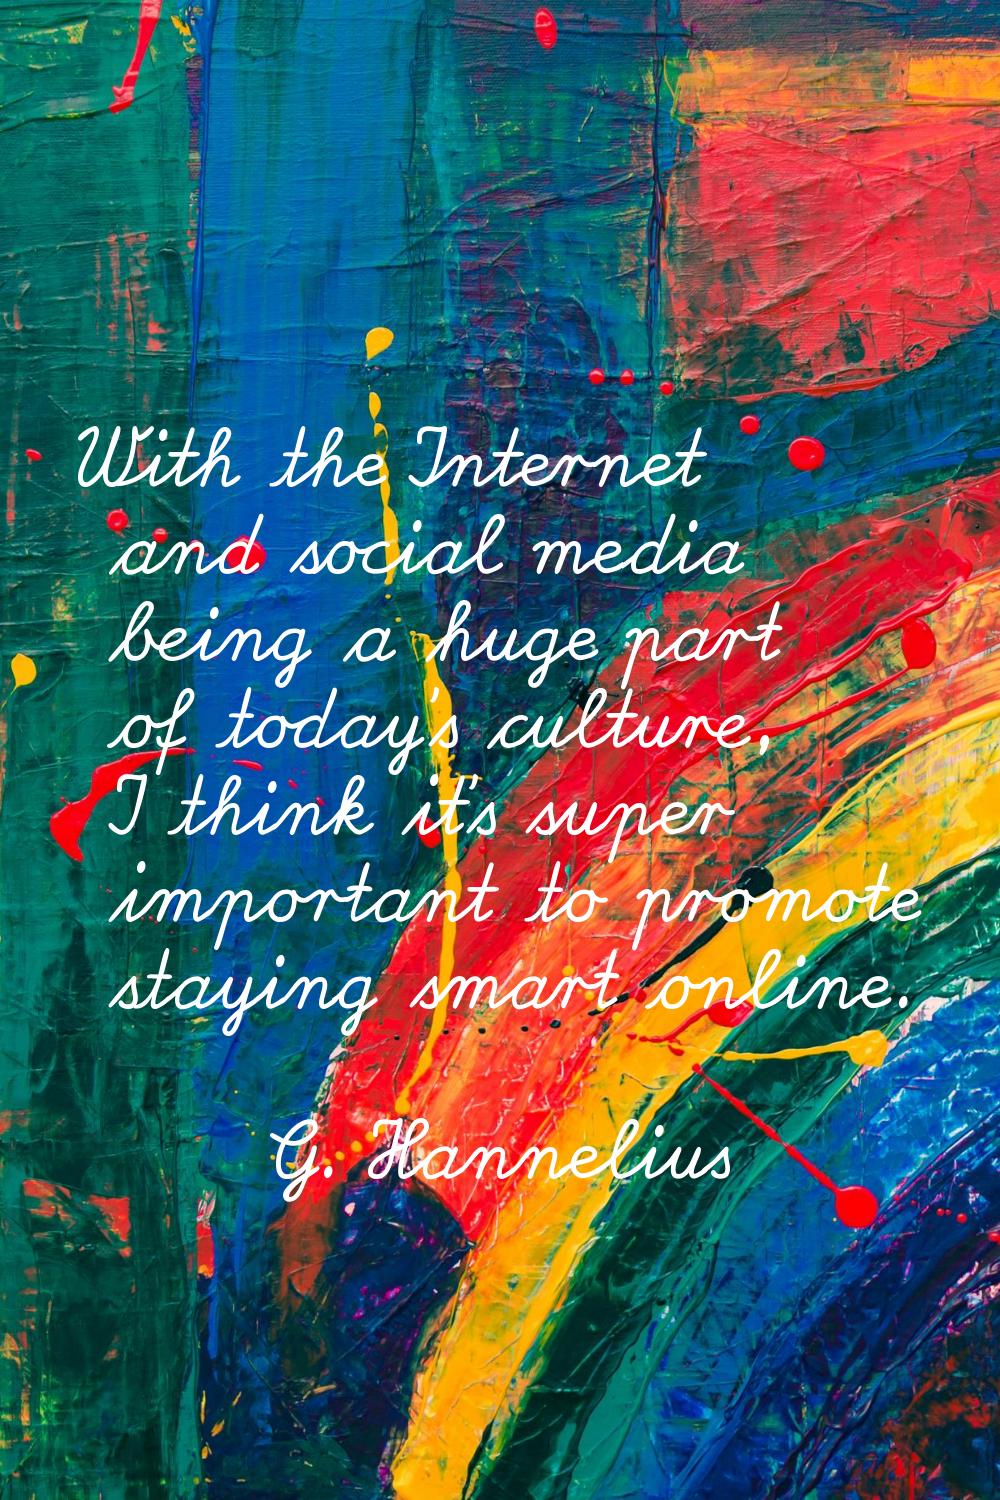 With the Internet and social media being a huge part of today's culture, I think it's super importa